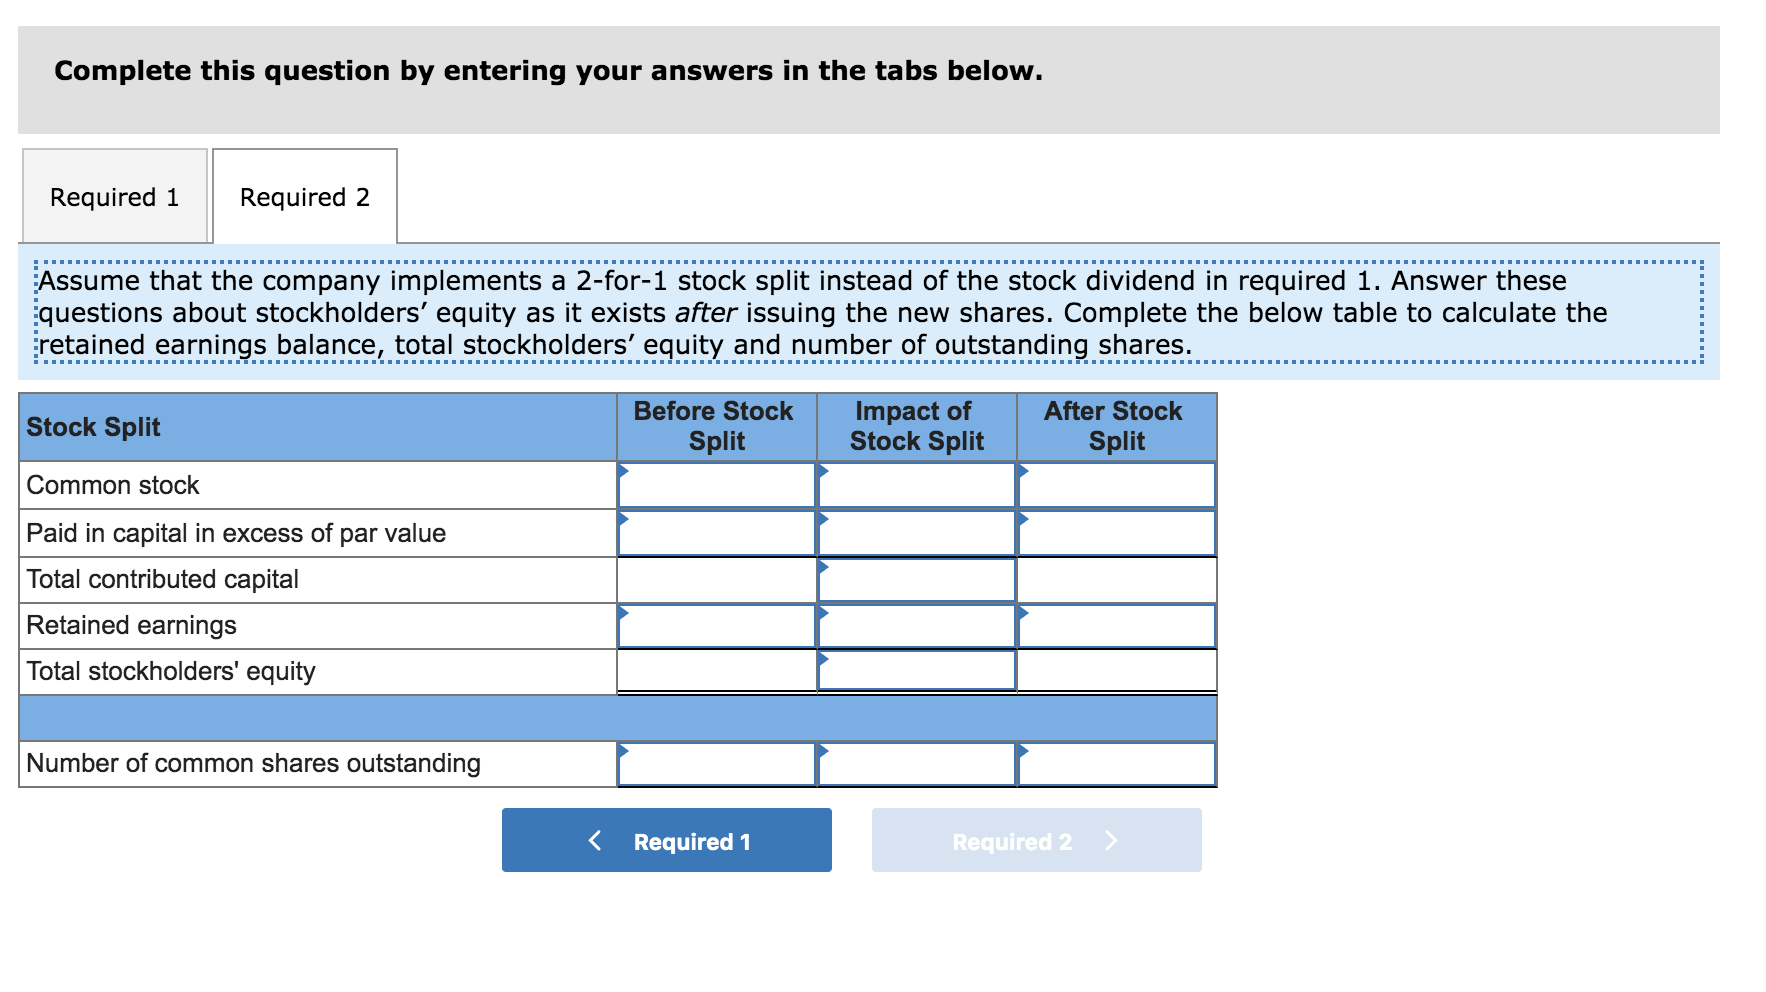 Complete this question by entering your answers in the tabs below.
Required 1
Required 2
Assume that the company implements a 2-for-1 stock split instead of the stock dividend in required 1. Answer these
questions about stockholders' equity as it exists after issuing the new shares. Complete the below table to calculate the
retained earnings balance, total stockholders' equity and number of outstanding shares.
Impact of
Stock Split
Before Stock
After Stock
Stock Split
Split
Split
Common stock
Paid in capital in excess of par value
Total contributed capital
Retained earnings
Total stockholders' equity
Number of common shares outstanding
Required 1
Required 2
